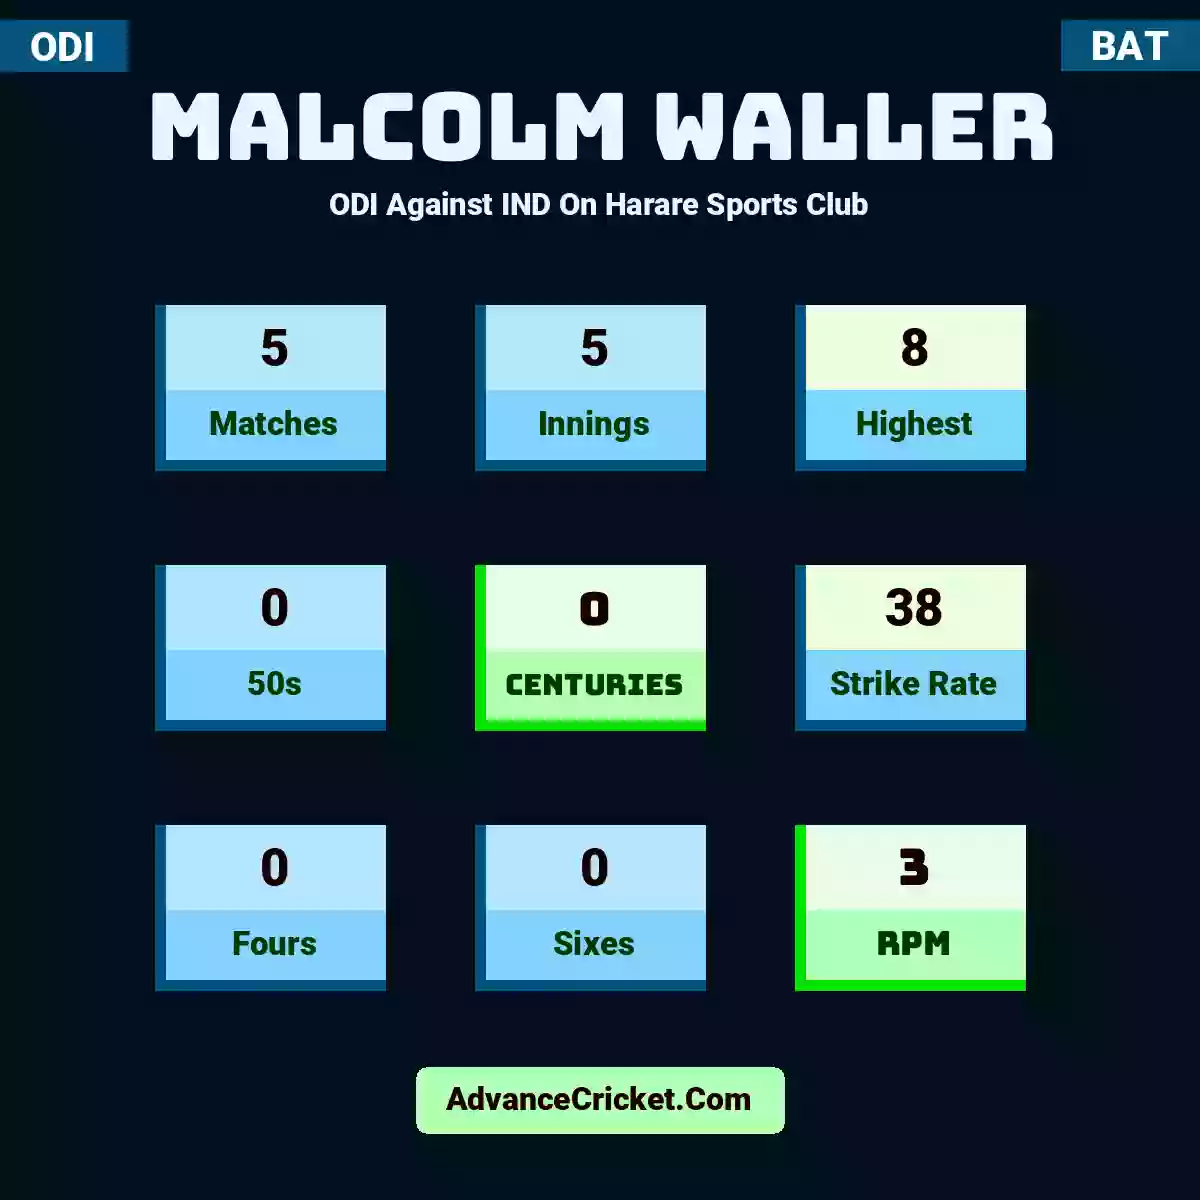 Malcolm Waller ODI  Against IND On Harare Sports Club, Malcolm Waller played 5 matches, scored 8 runs as highest, 0 half-centuries, and 0 centuries, with a strike rate of 38. M.Waller hit 0 fours and 0 sixes, with an RPM of 3.